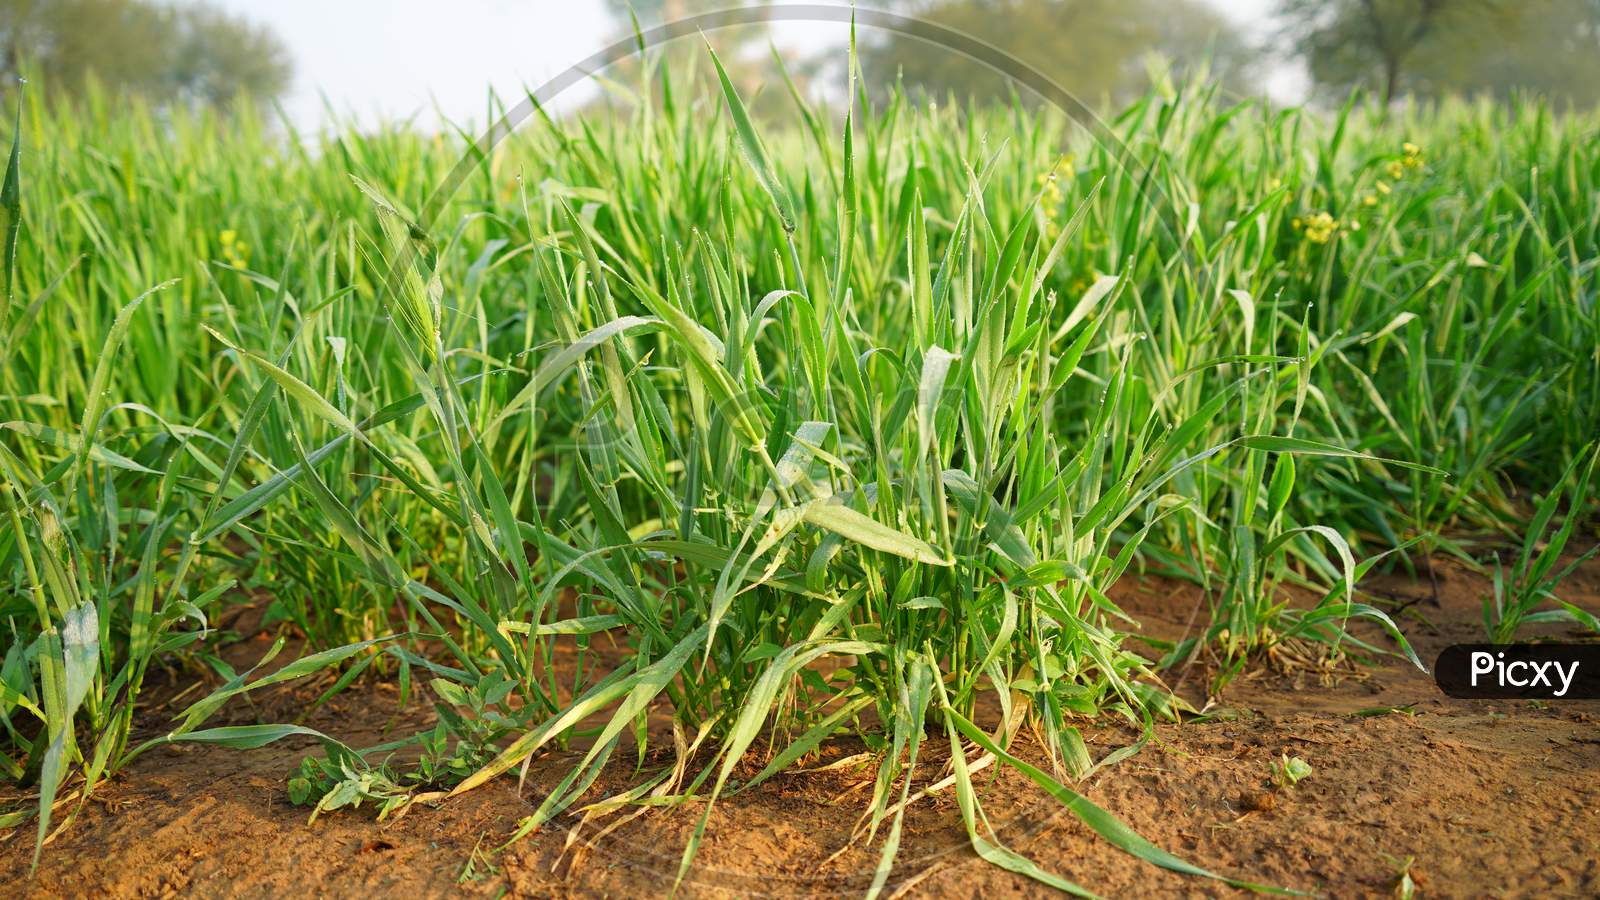 Green Leaves Or Plants Of Wheat Or Triticum With Dewdrops Leaves. Plant Flowering In Field.